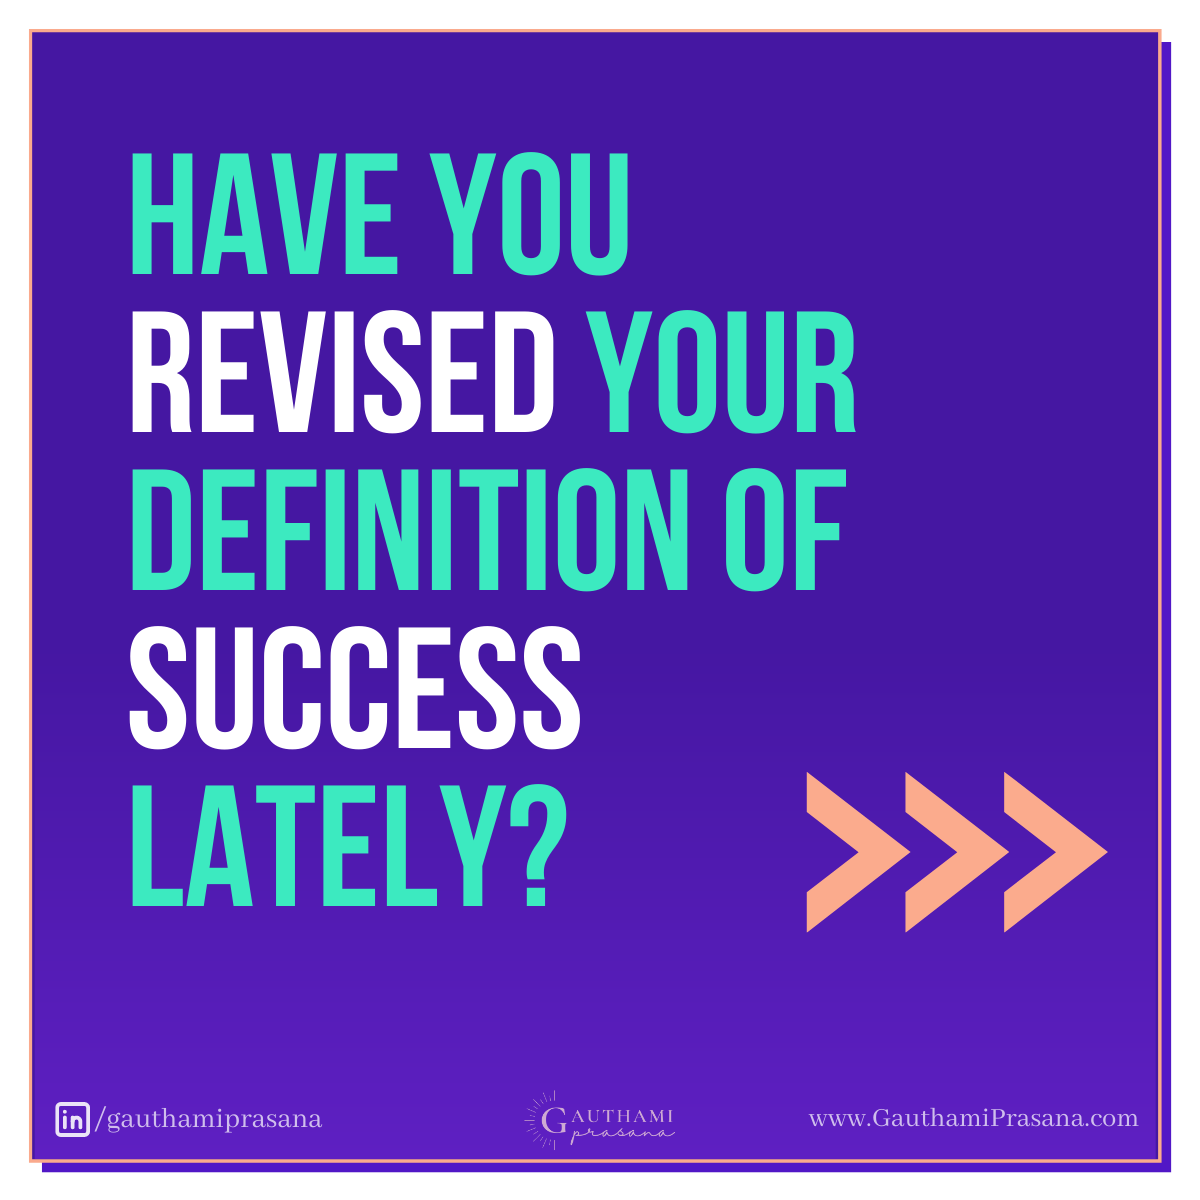 What is your definition of success robbing you of?

A brief exercise >>

#fulfillment #success #meaning #values #growthmindset #startwithwhy #welness #worklifebalance #highperformance #coaching #selfleadership #selfworth #confidence